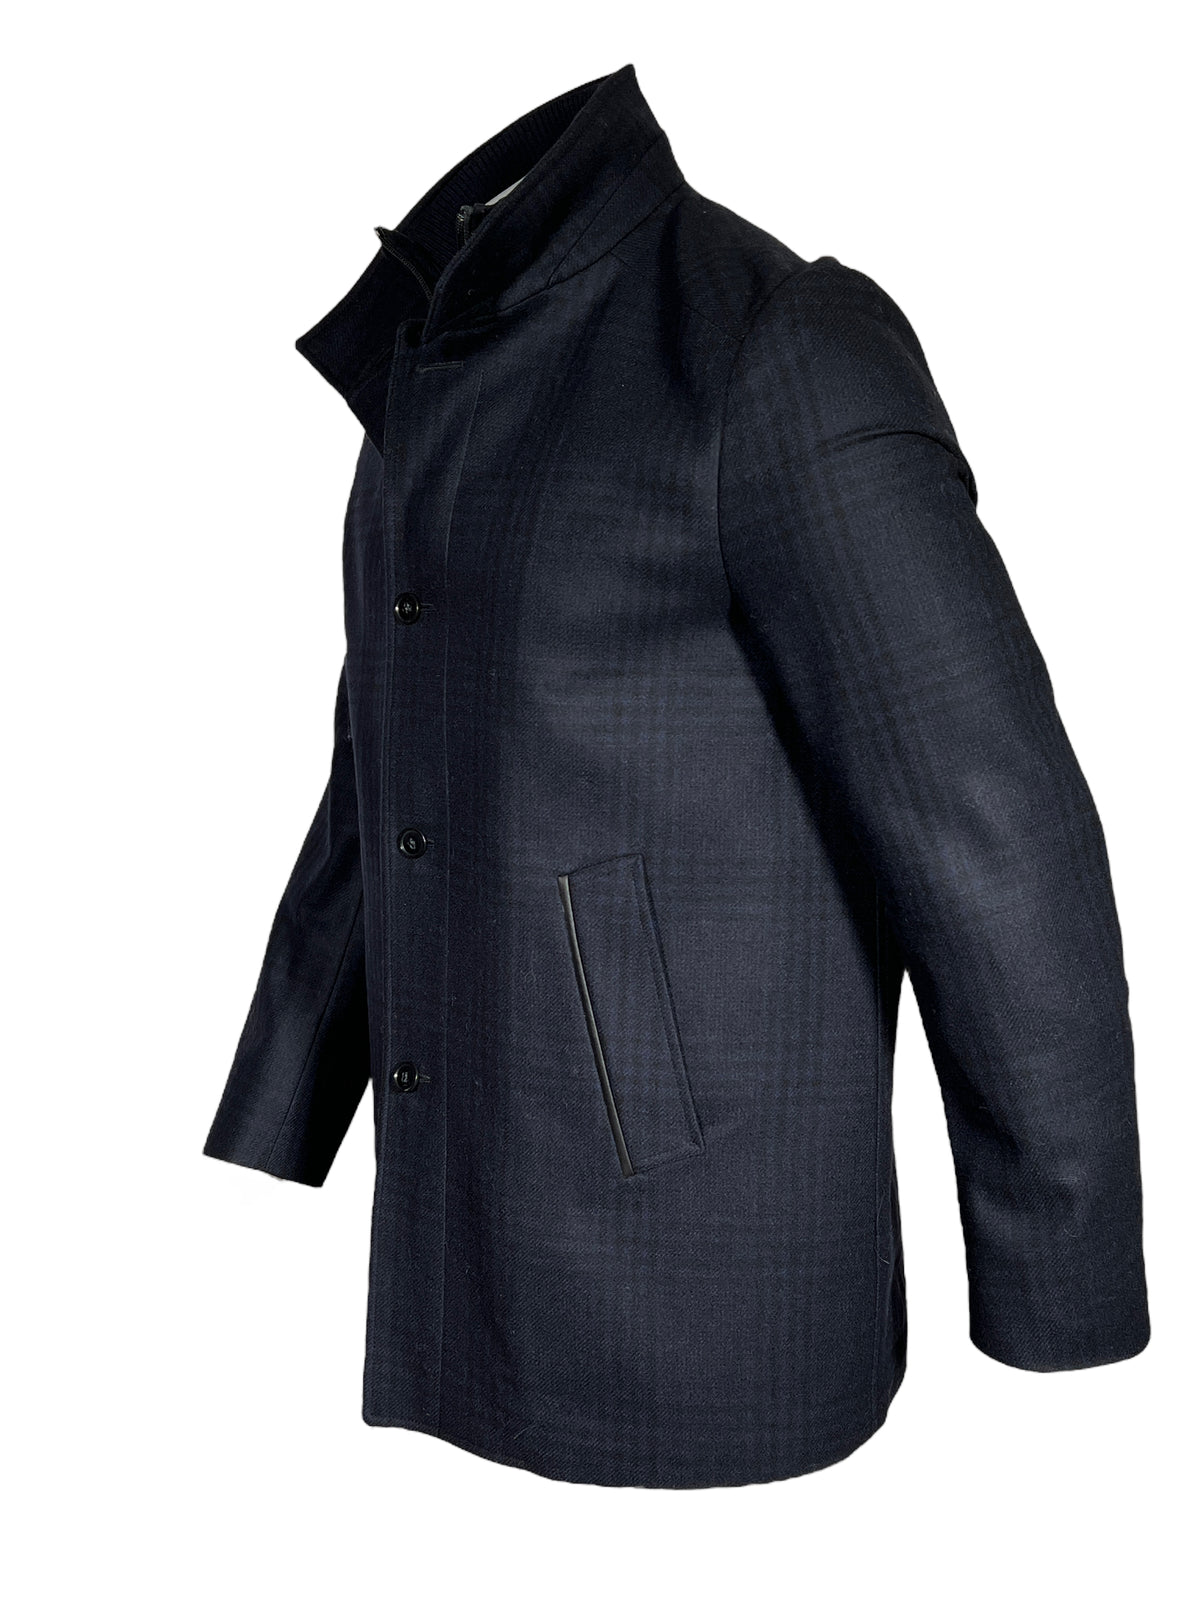 OARS & OLD IVY WOOL CAR COAT WITH LEATHER TRIM - BLACKWATCH